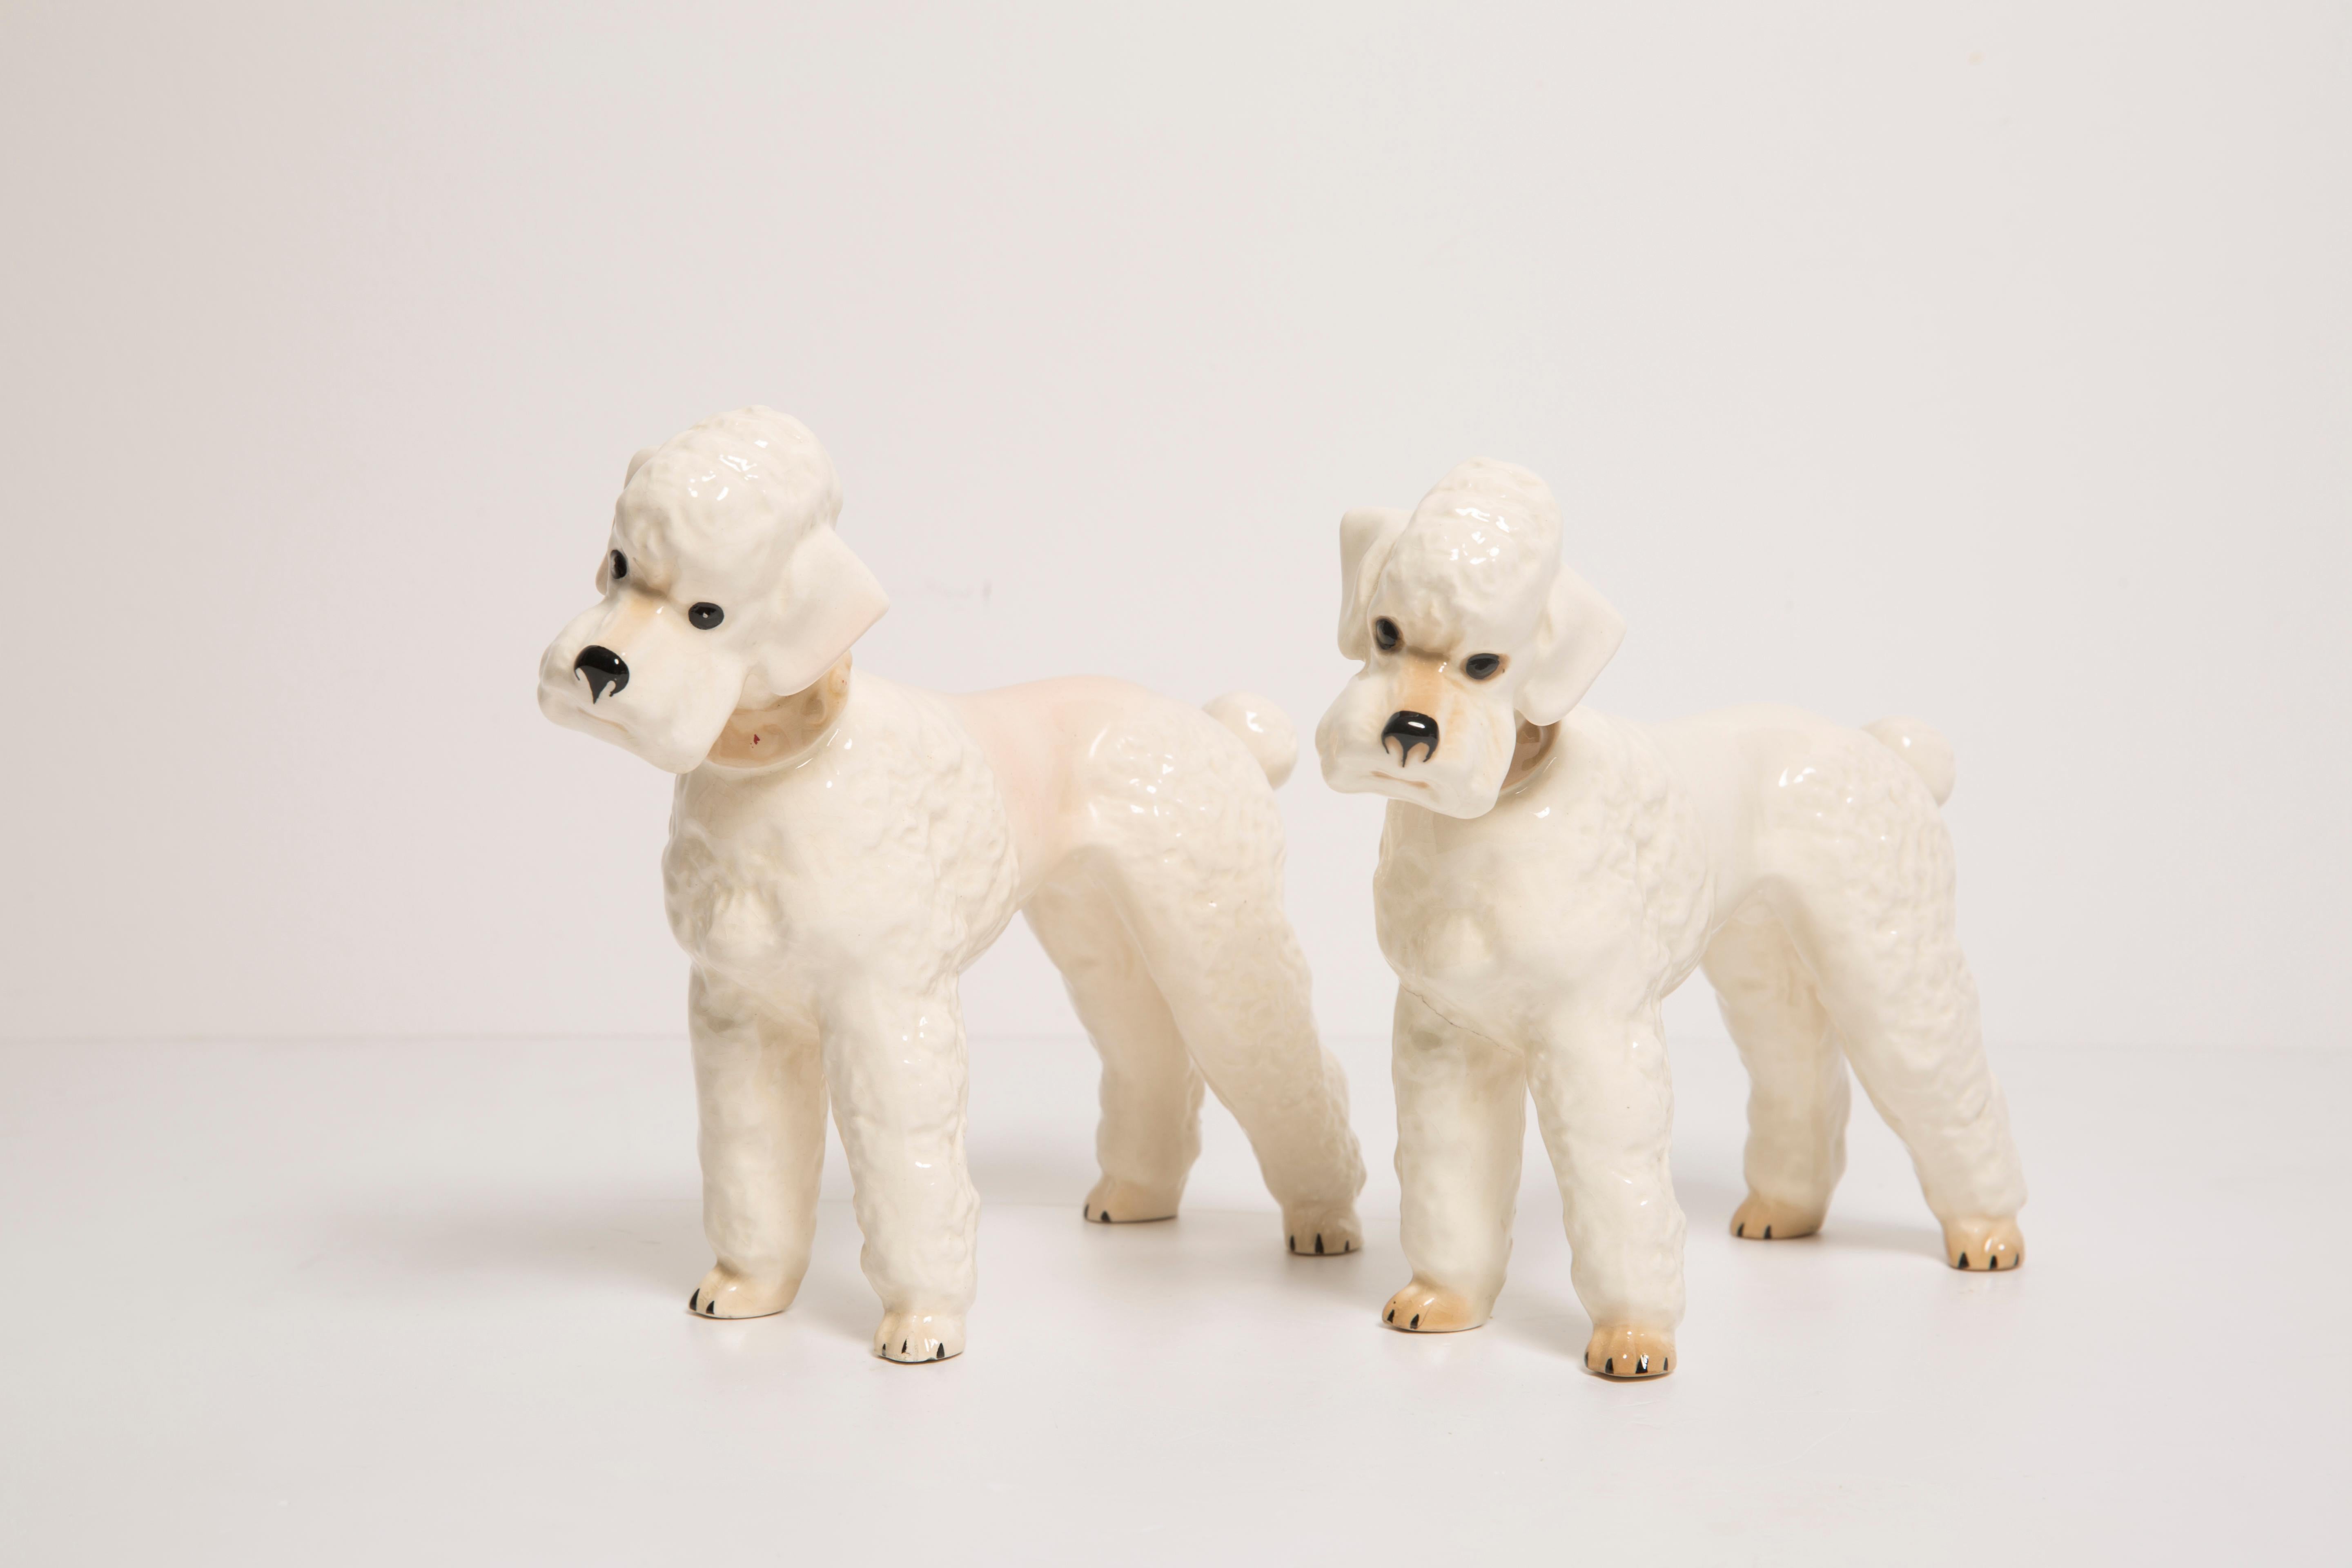 Painted ceramic, good original vintage condition. 
One dog is repaired - as shown on pictures.
Beautiful and unique decorative sculptures. 
White Poodle Dogs Sculptures were produced in Italy. 
Only one pair available.